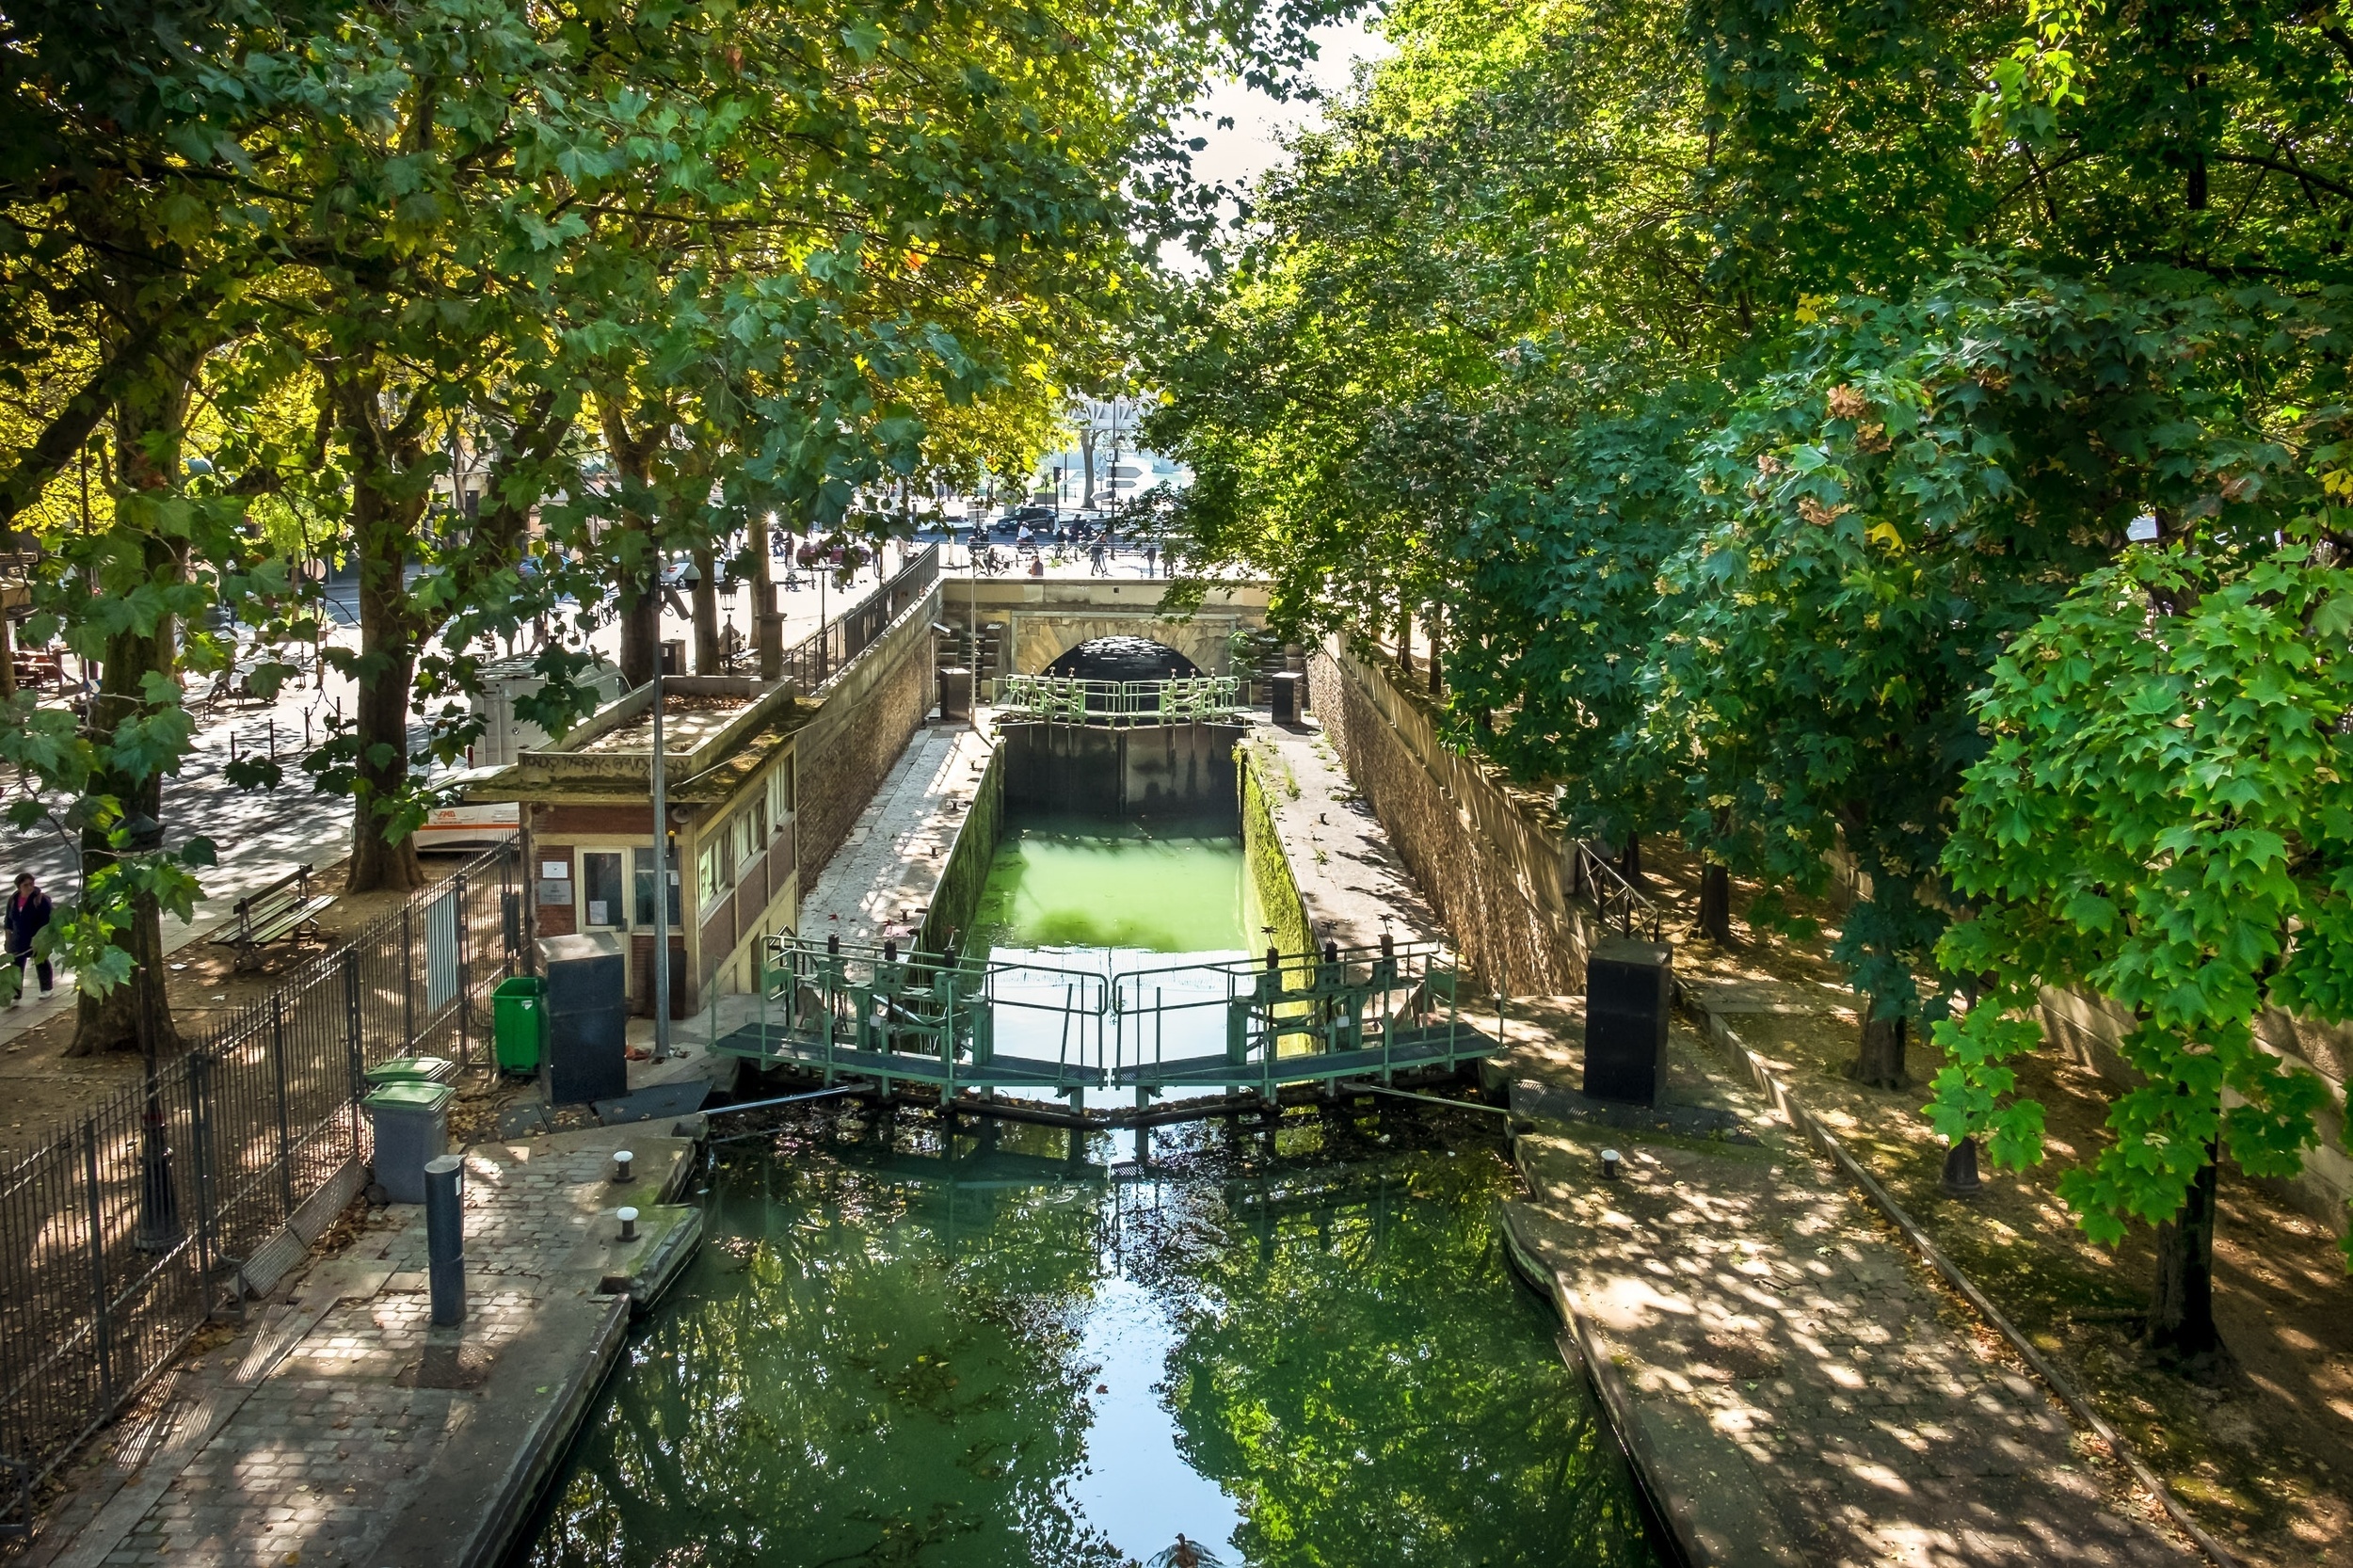 <p>Located in the 10th arrondissement of the city, the canal (and surrounding area) is popular with residents. It is much less touristy than other areas but home to many superb restaurants and bars, many located along the canal.</p><p><a href='https://www.msn.com/en-us/community/channel/vid-cj9pqbr0vn9in2b6ddcd8sfgpfq6x6utp44fssrv6mc2gtybw0us'>Follow us on MSN to see more of our exclusive lifestyle content.</a></p>